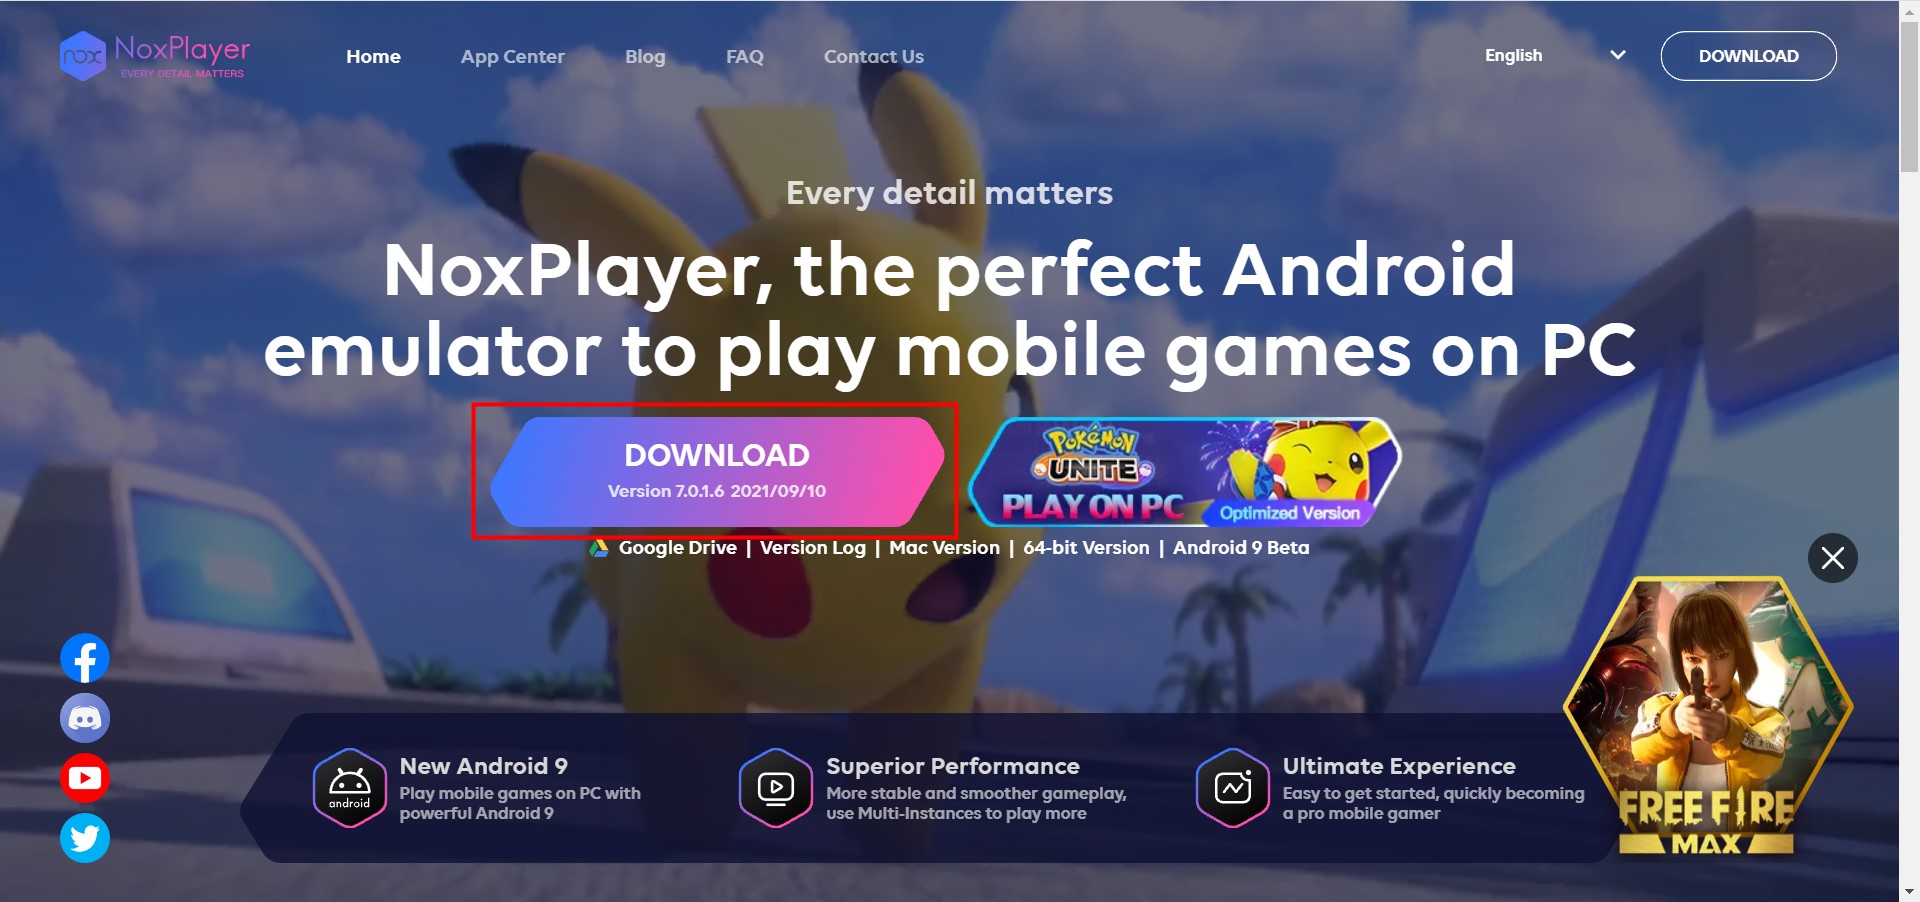 Download & Play Move to iOS on PC with NoxPlayer - Appcenter